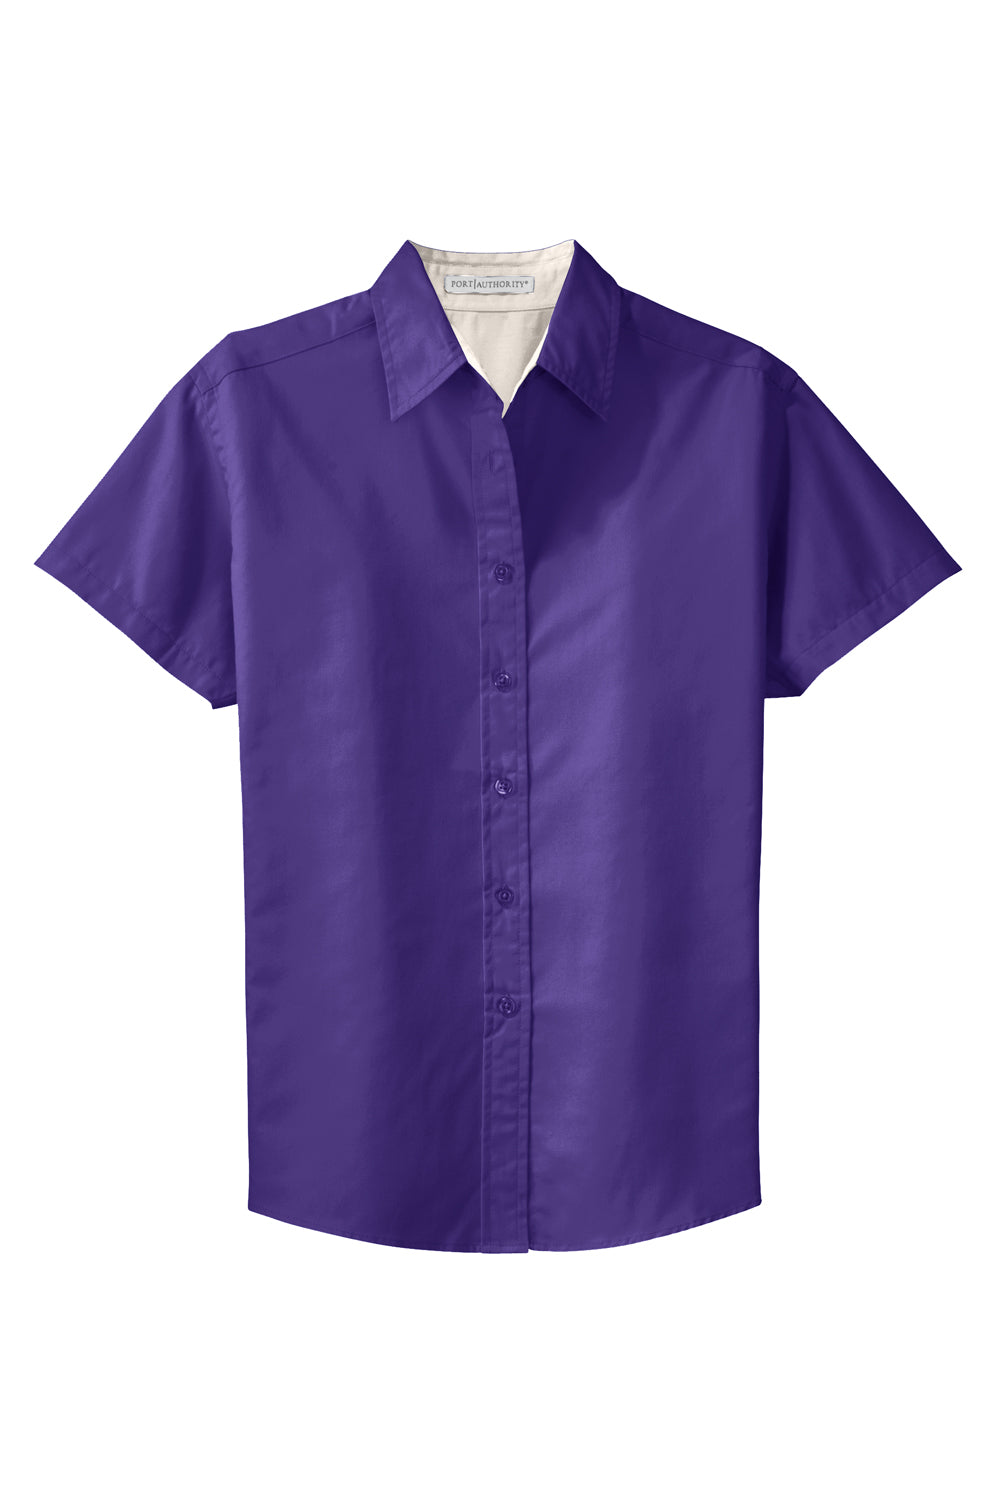 Port Authority L508 Womens Easy Care Wrinkle Resistant Short Sleeve Button Down Shirt Purple Flat Front